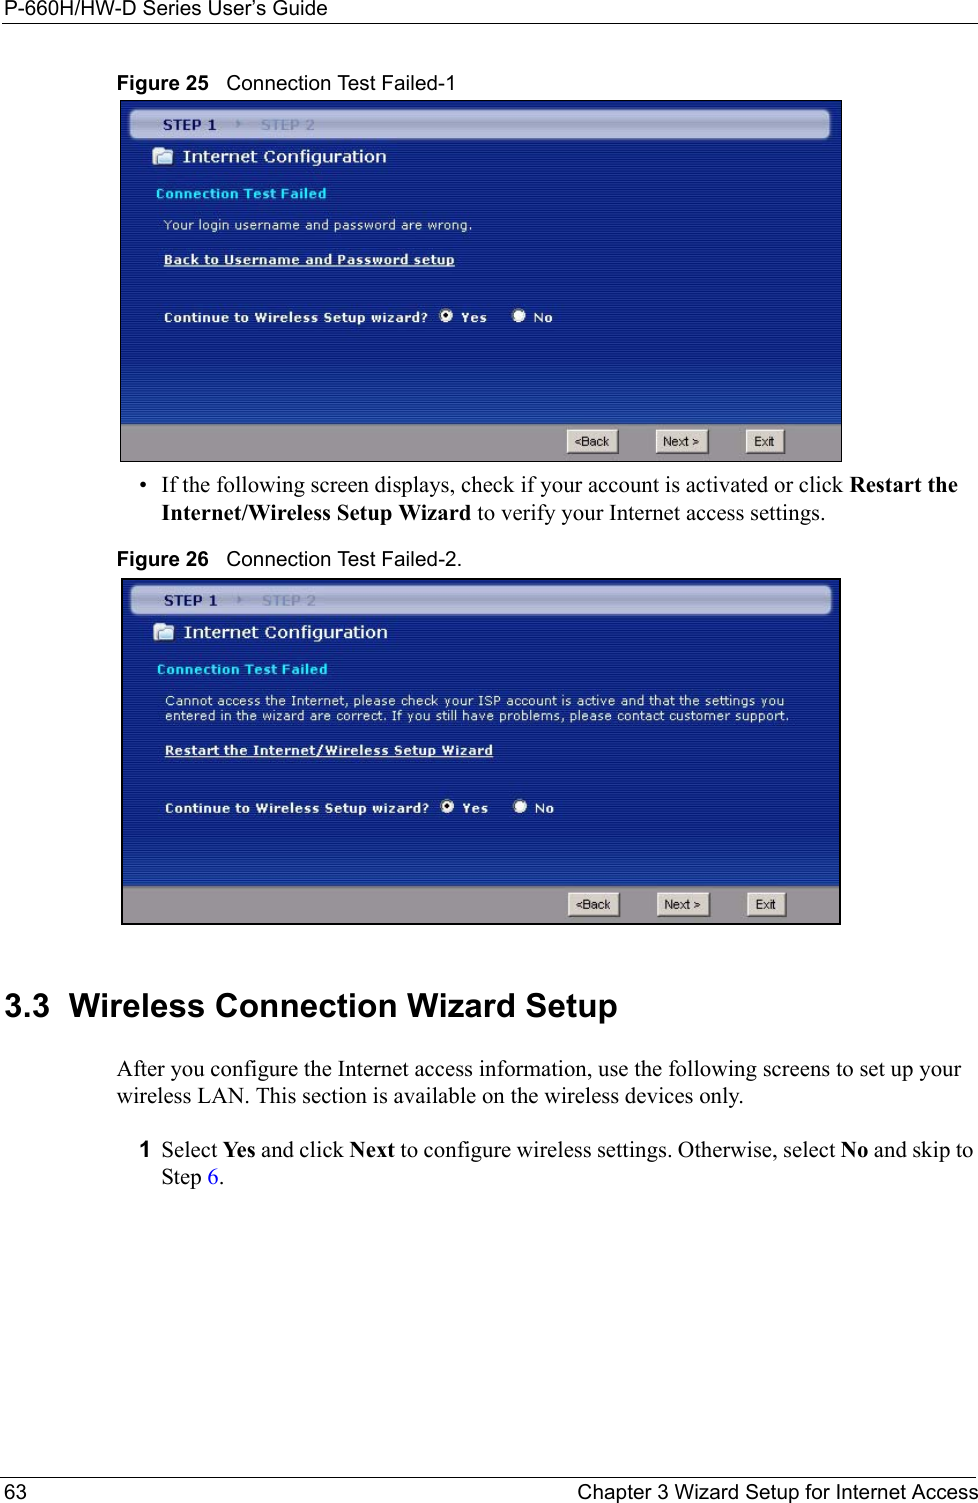 P-660H/HW-D Series User’s Guide63 Chapter 3 Wizard Setup for Internet AccessFigure 25   Connection Test Failed-1• If the following screen displays, check if your account is activated or click Restart the Internet/Wireless Setup Wizard to verify your Internet access settings. Figure 26   Connection Test Failed-2.3.3  Wireless Connection Wizard SetupAfter you configure the Internet access information, use the following screens to set up your wireless LAN. This section is available on the wireless devices only.1Select Ye s  and click Next to configure wireless settings. Otherwise, select No and skip to Step 6.